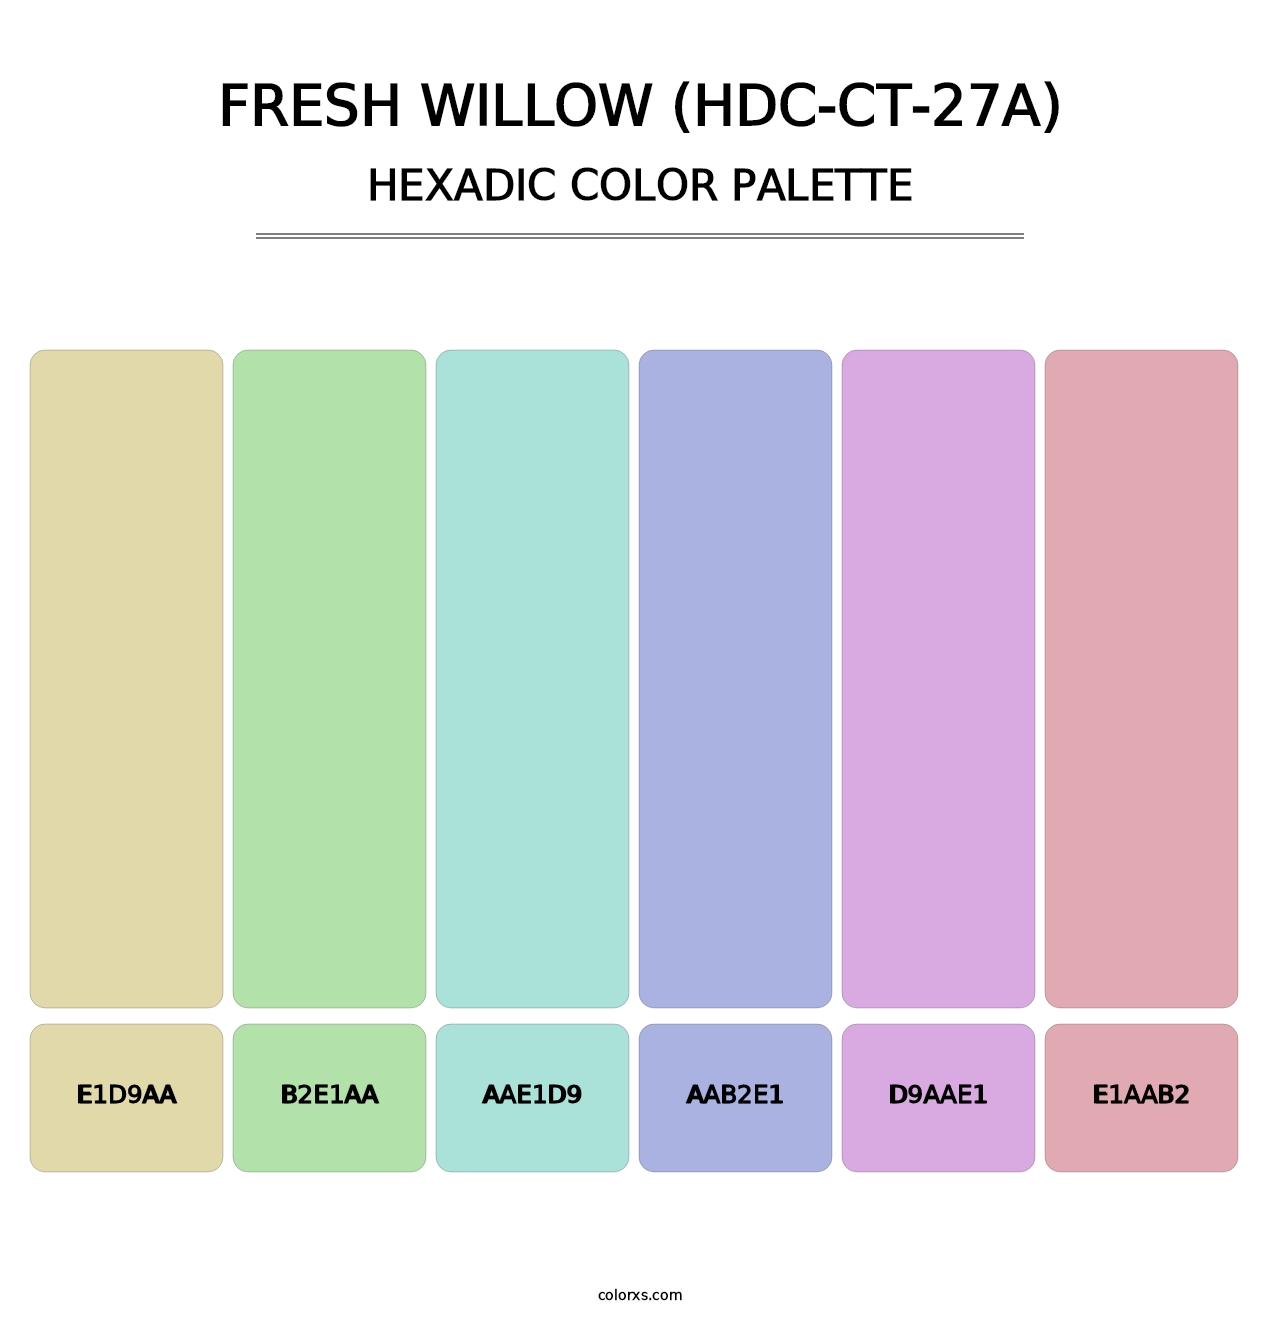 Fresh Willow (HDC-CT-27A) - Hexadic Color Palette